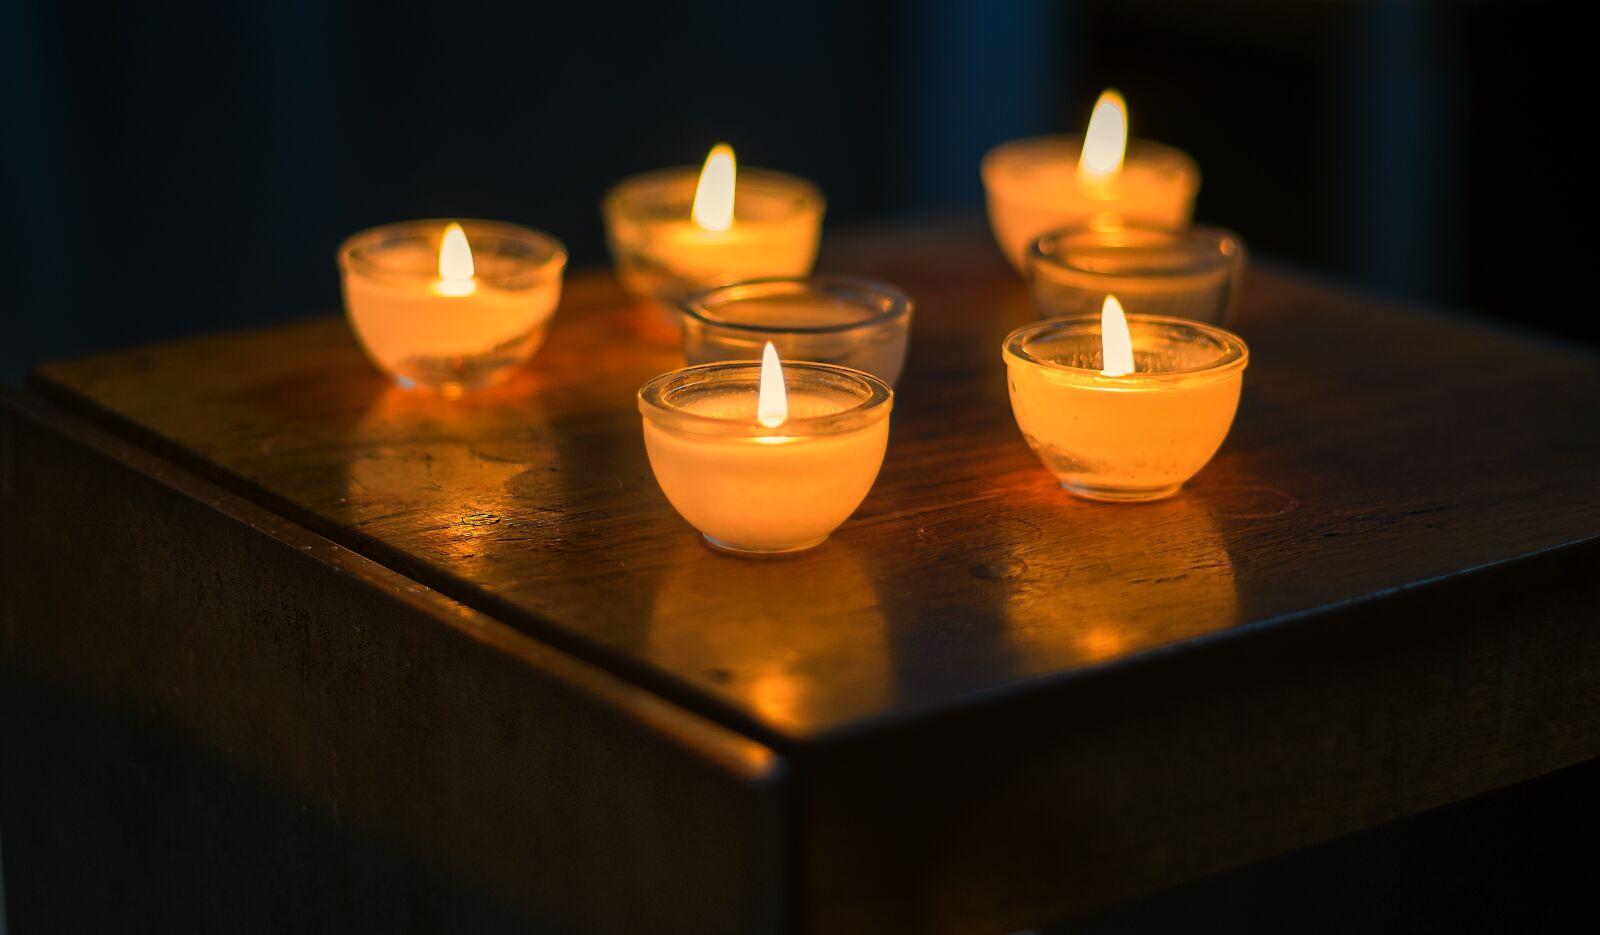 Sony a7 II + Sony DT 50mm F1.8 SAM sample photo. Background, candles, tea lights photography